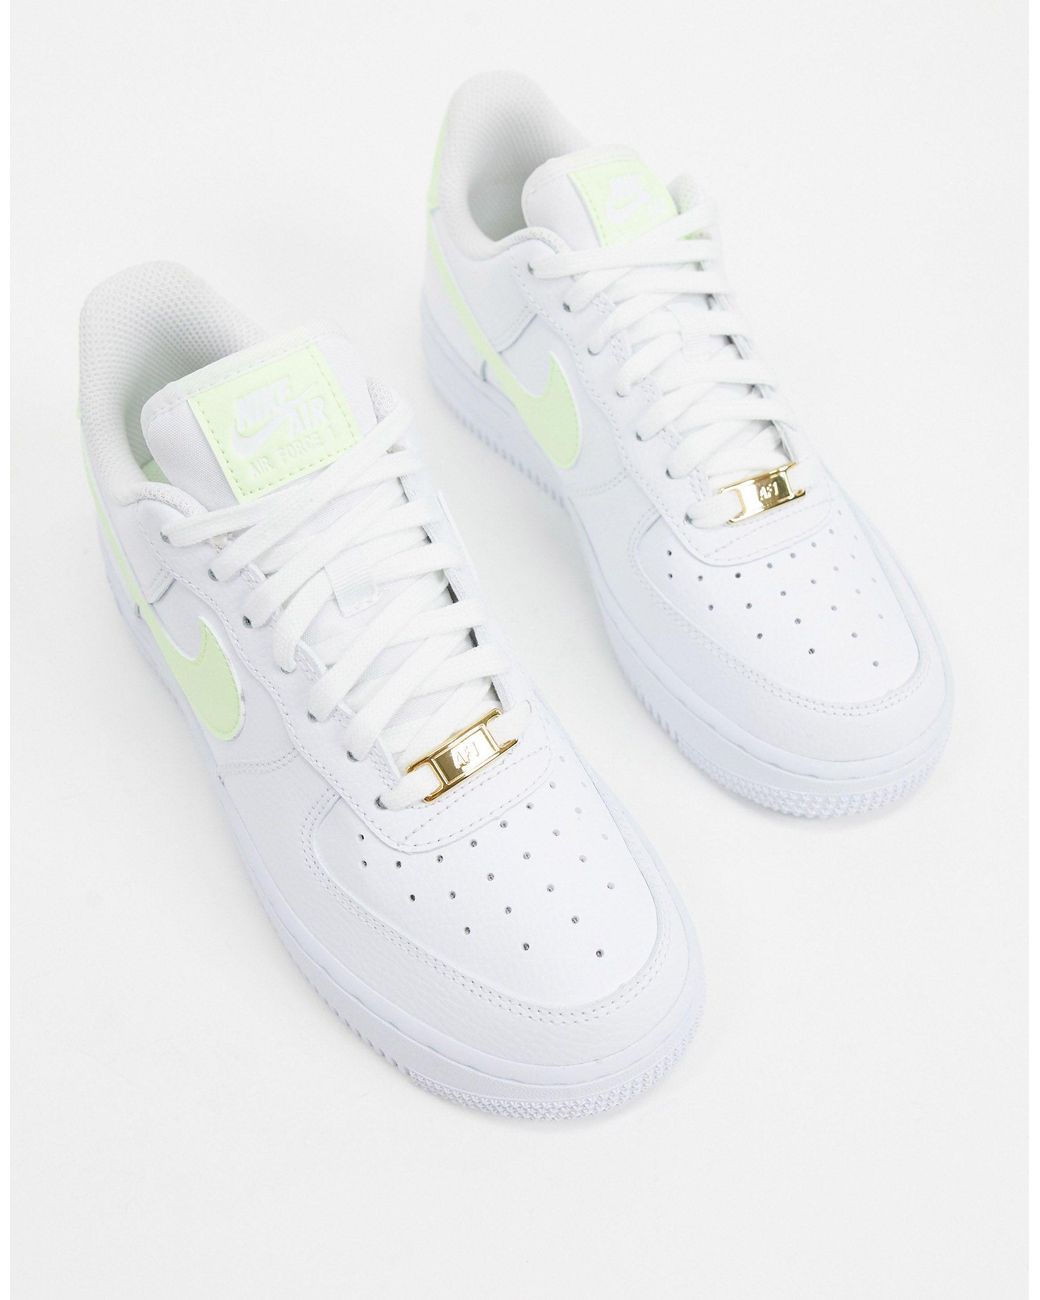 Nike Air Force 1 '07 White And Fluro Green Sneakers | Lyst UK